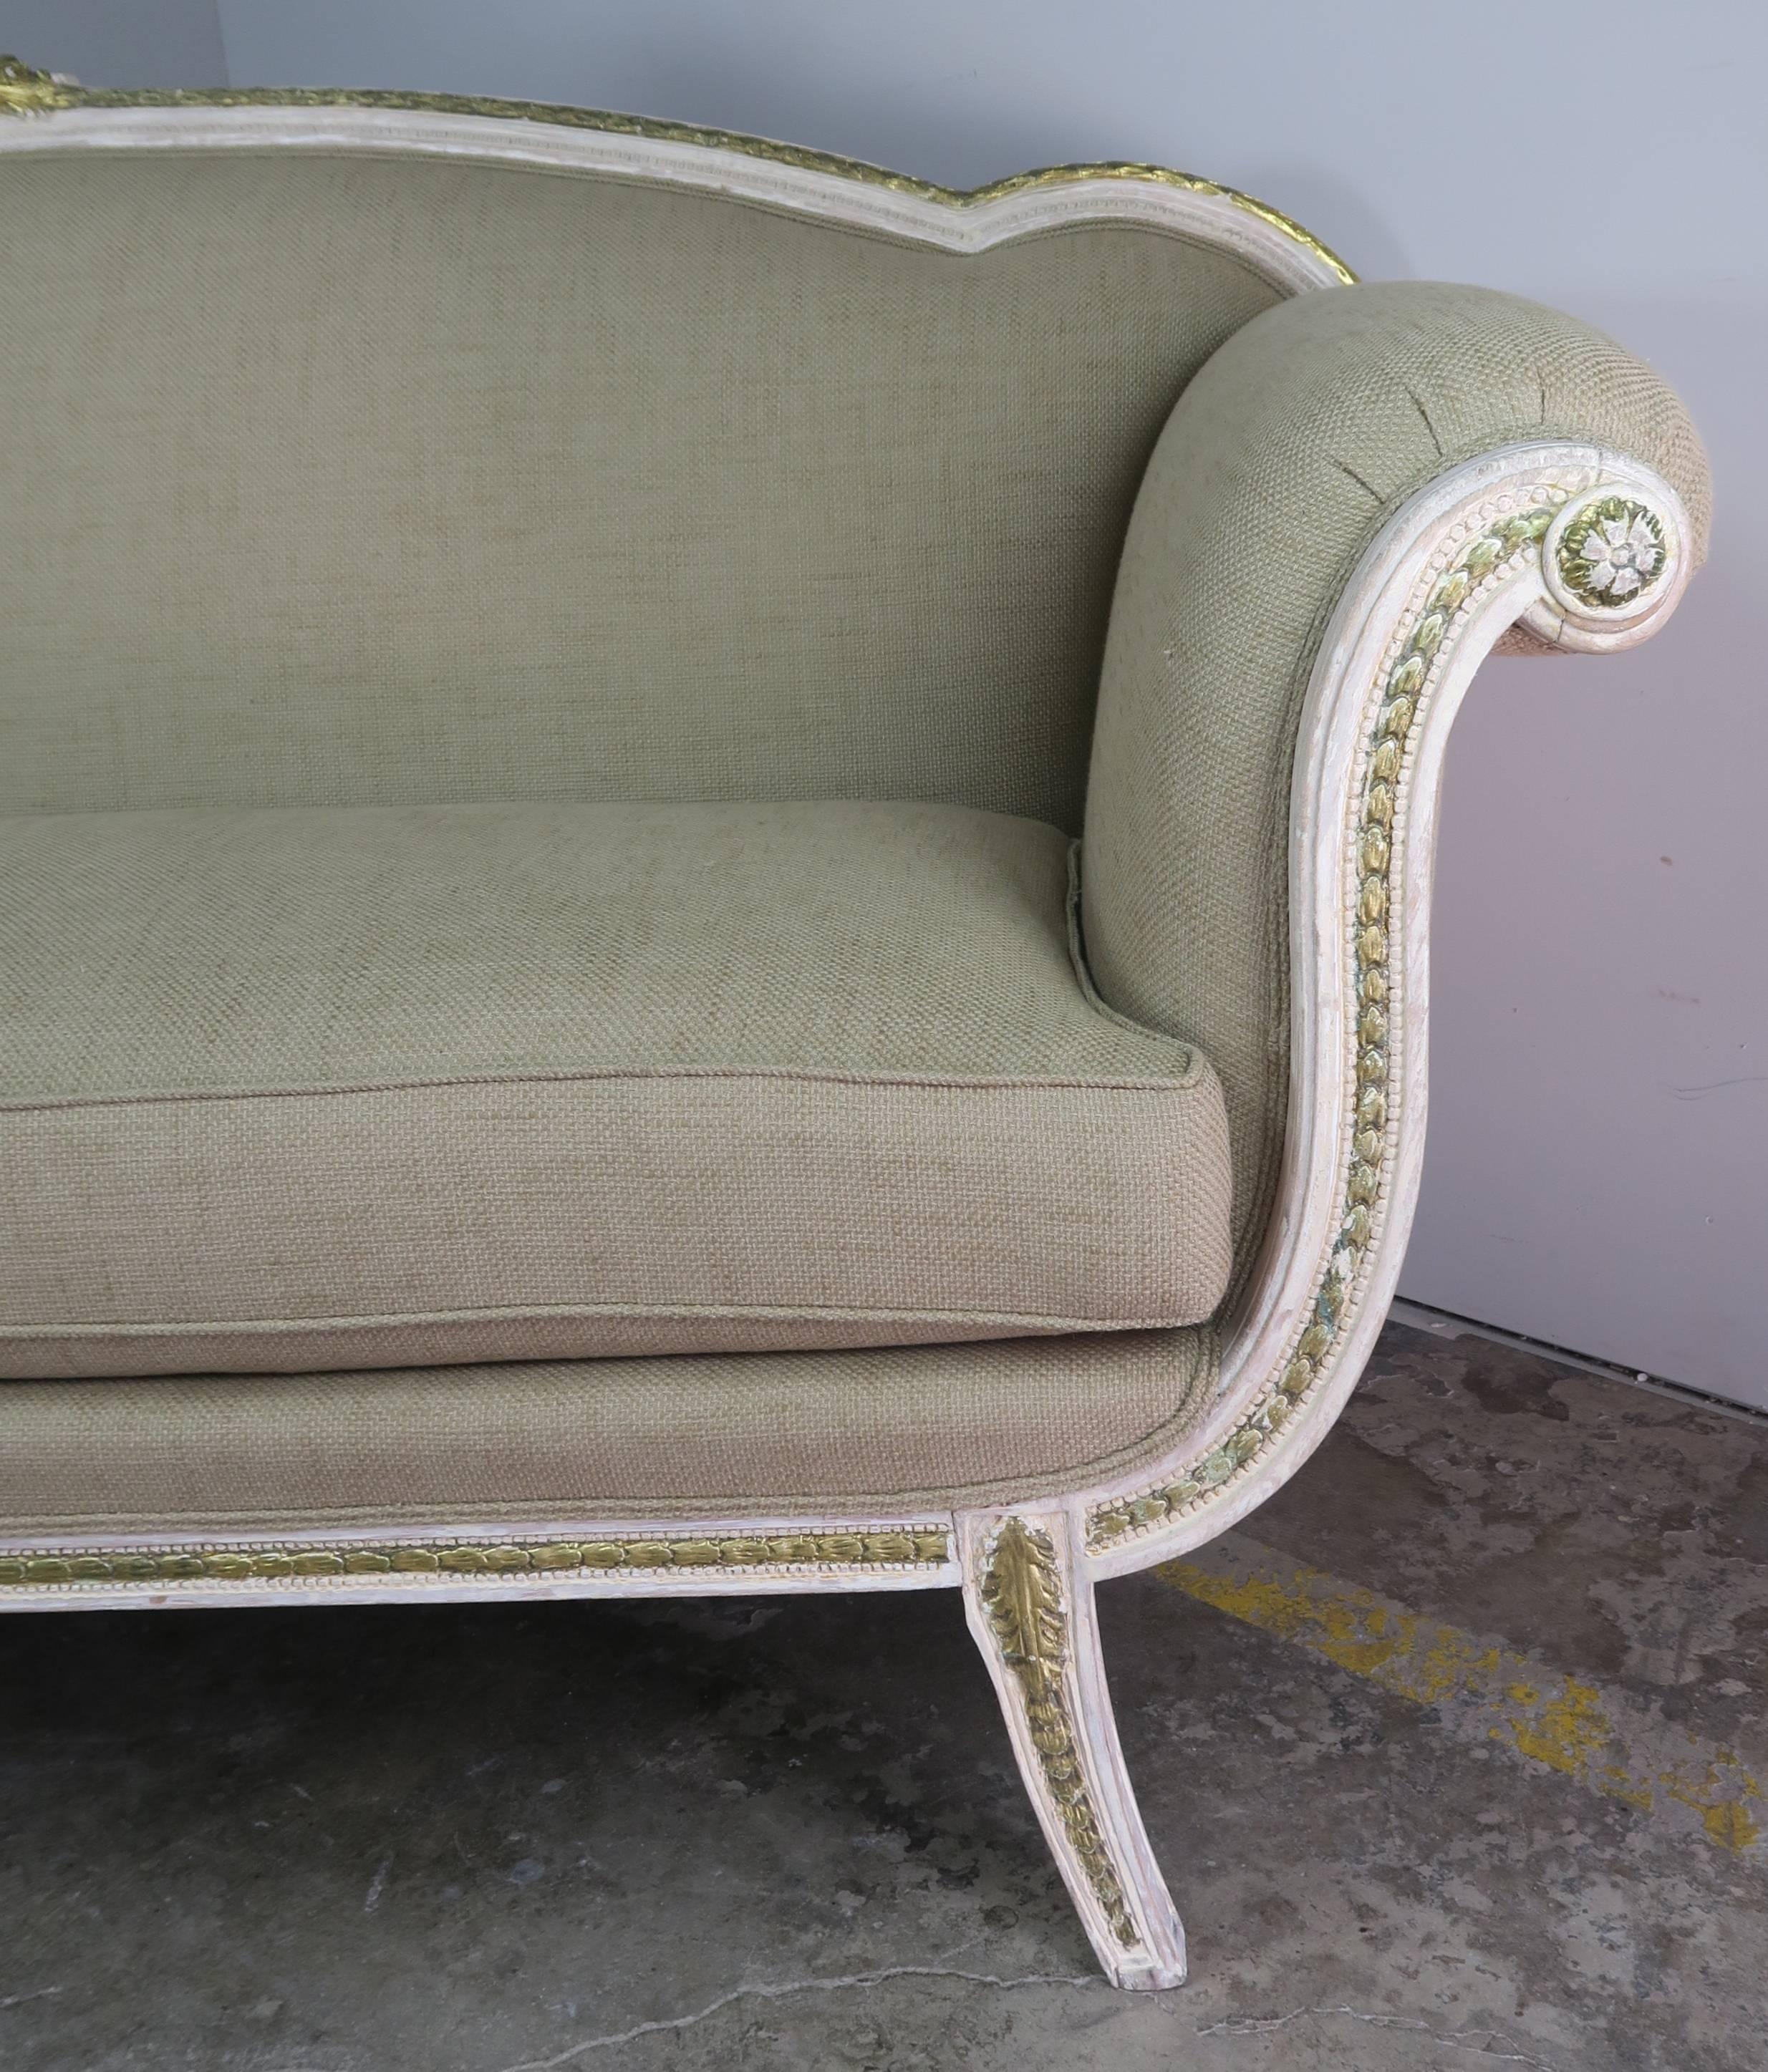 Italian carved wood painted and parcel-gilt sofa standing on four straight legs. The sofa has been newly upholstered in a textured linen with a loose seat cushion. Measures: 21